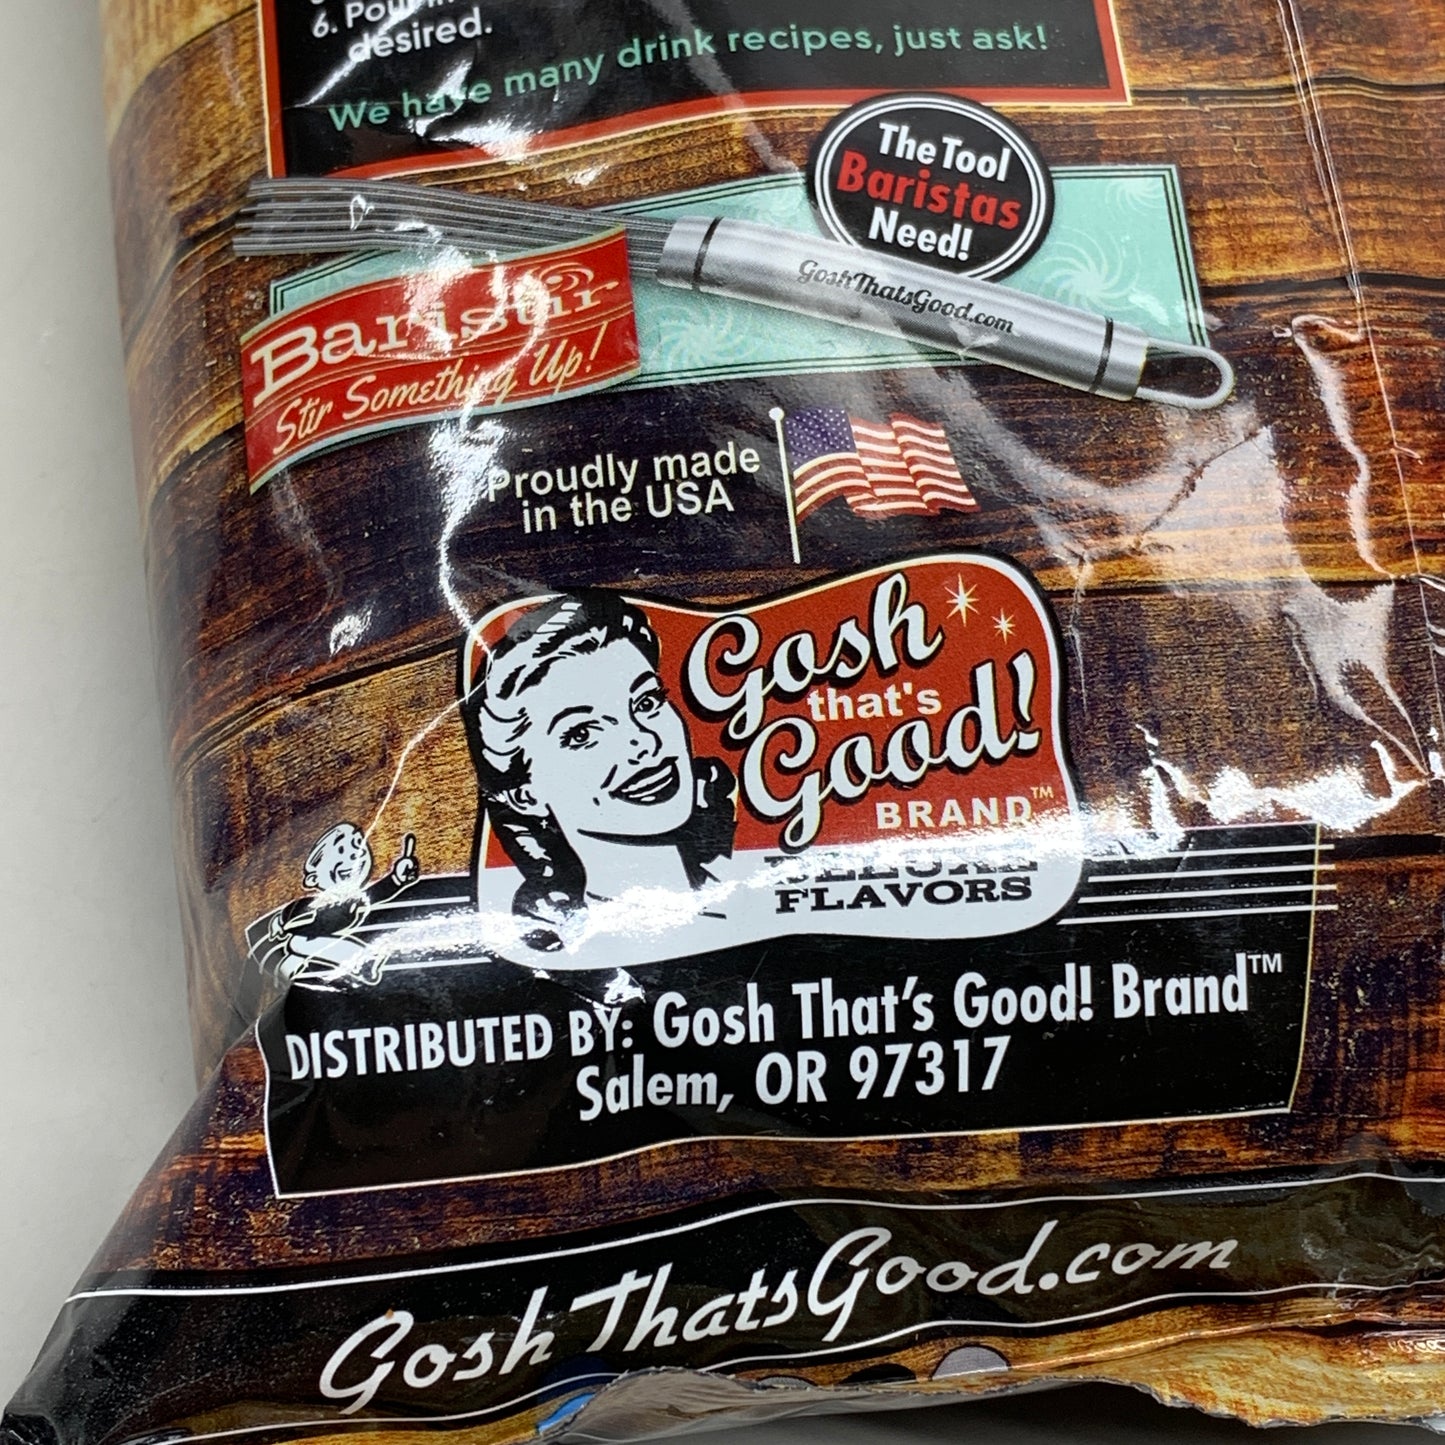 GOSH THATS GOOD (2 PACKS) Deluxe Flavors White Chocolate Flavor Sugar Free 2 lbs